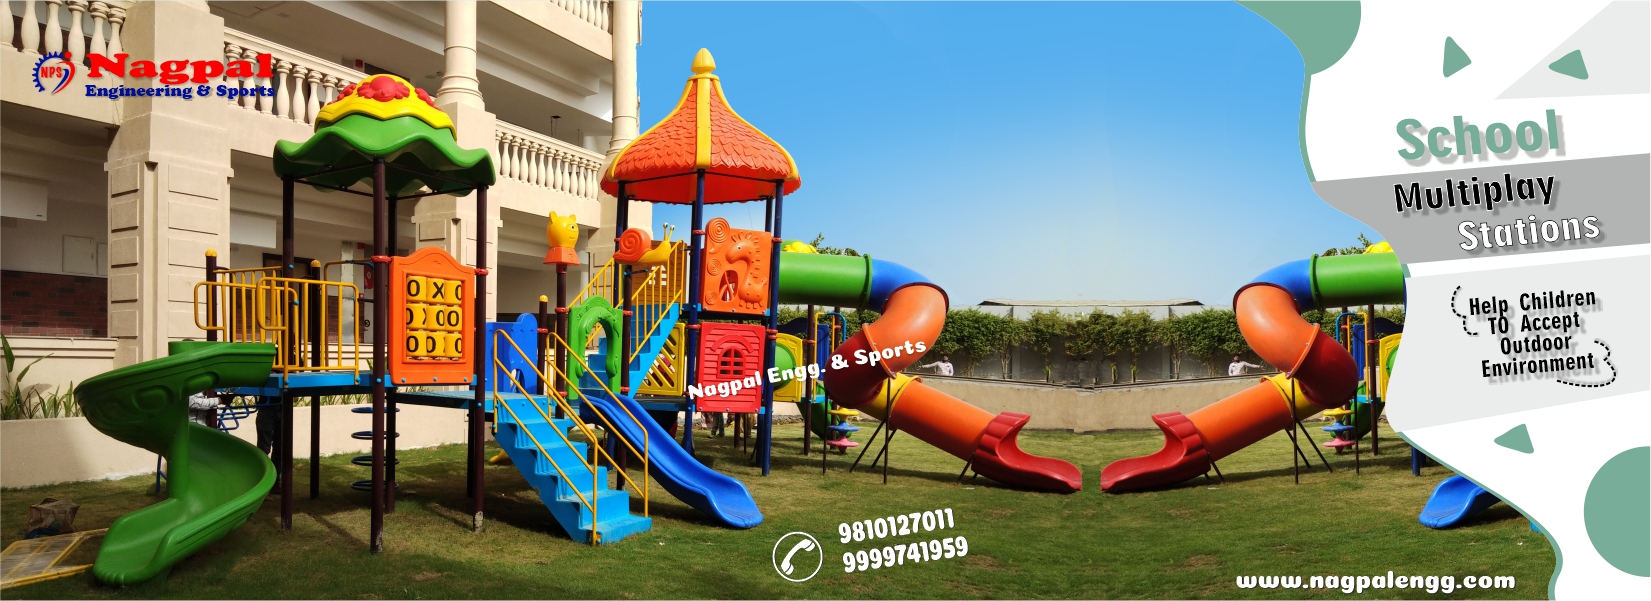 Roto Multiplay System Manufacturers, Exporters & Suppliers in Kota